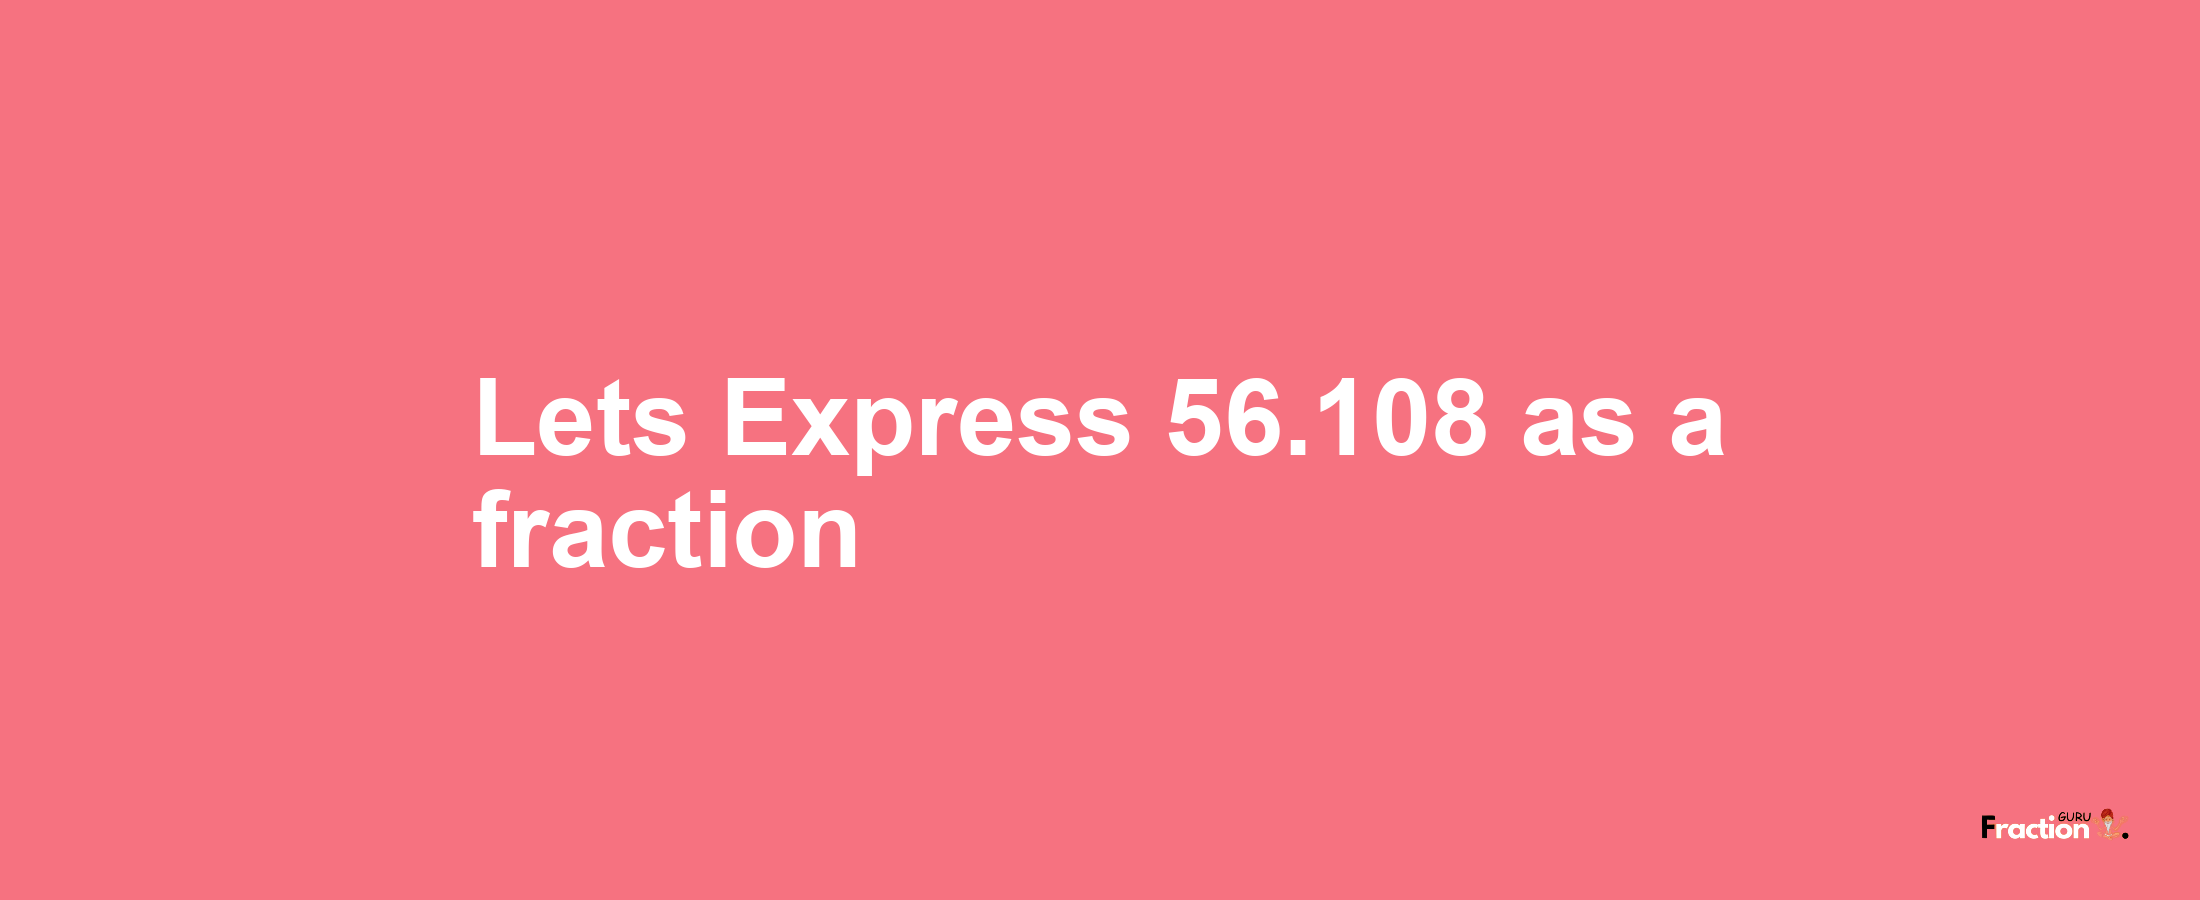 Lets Express 56.108 as afraction